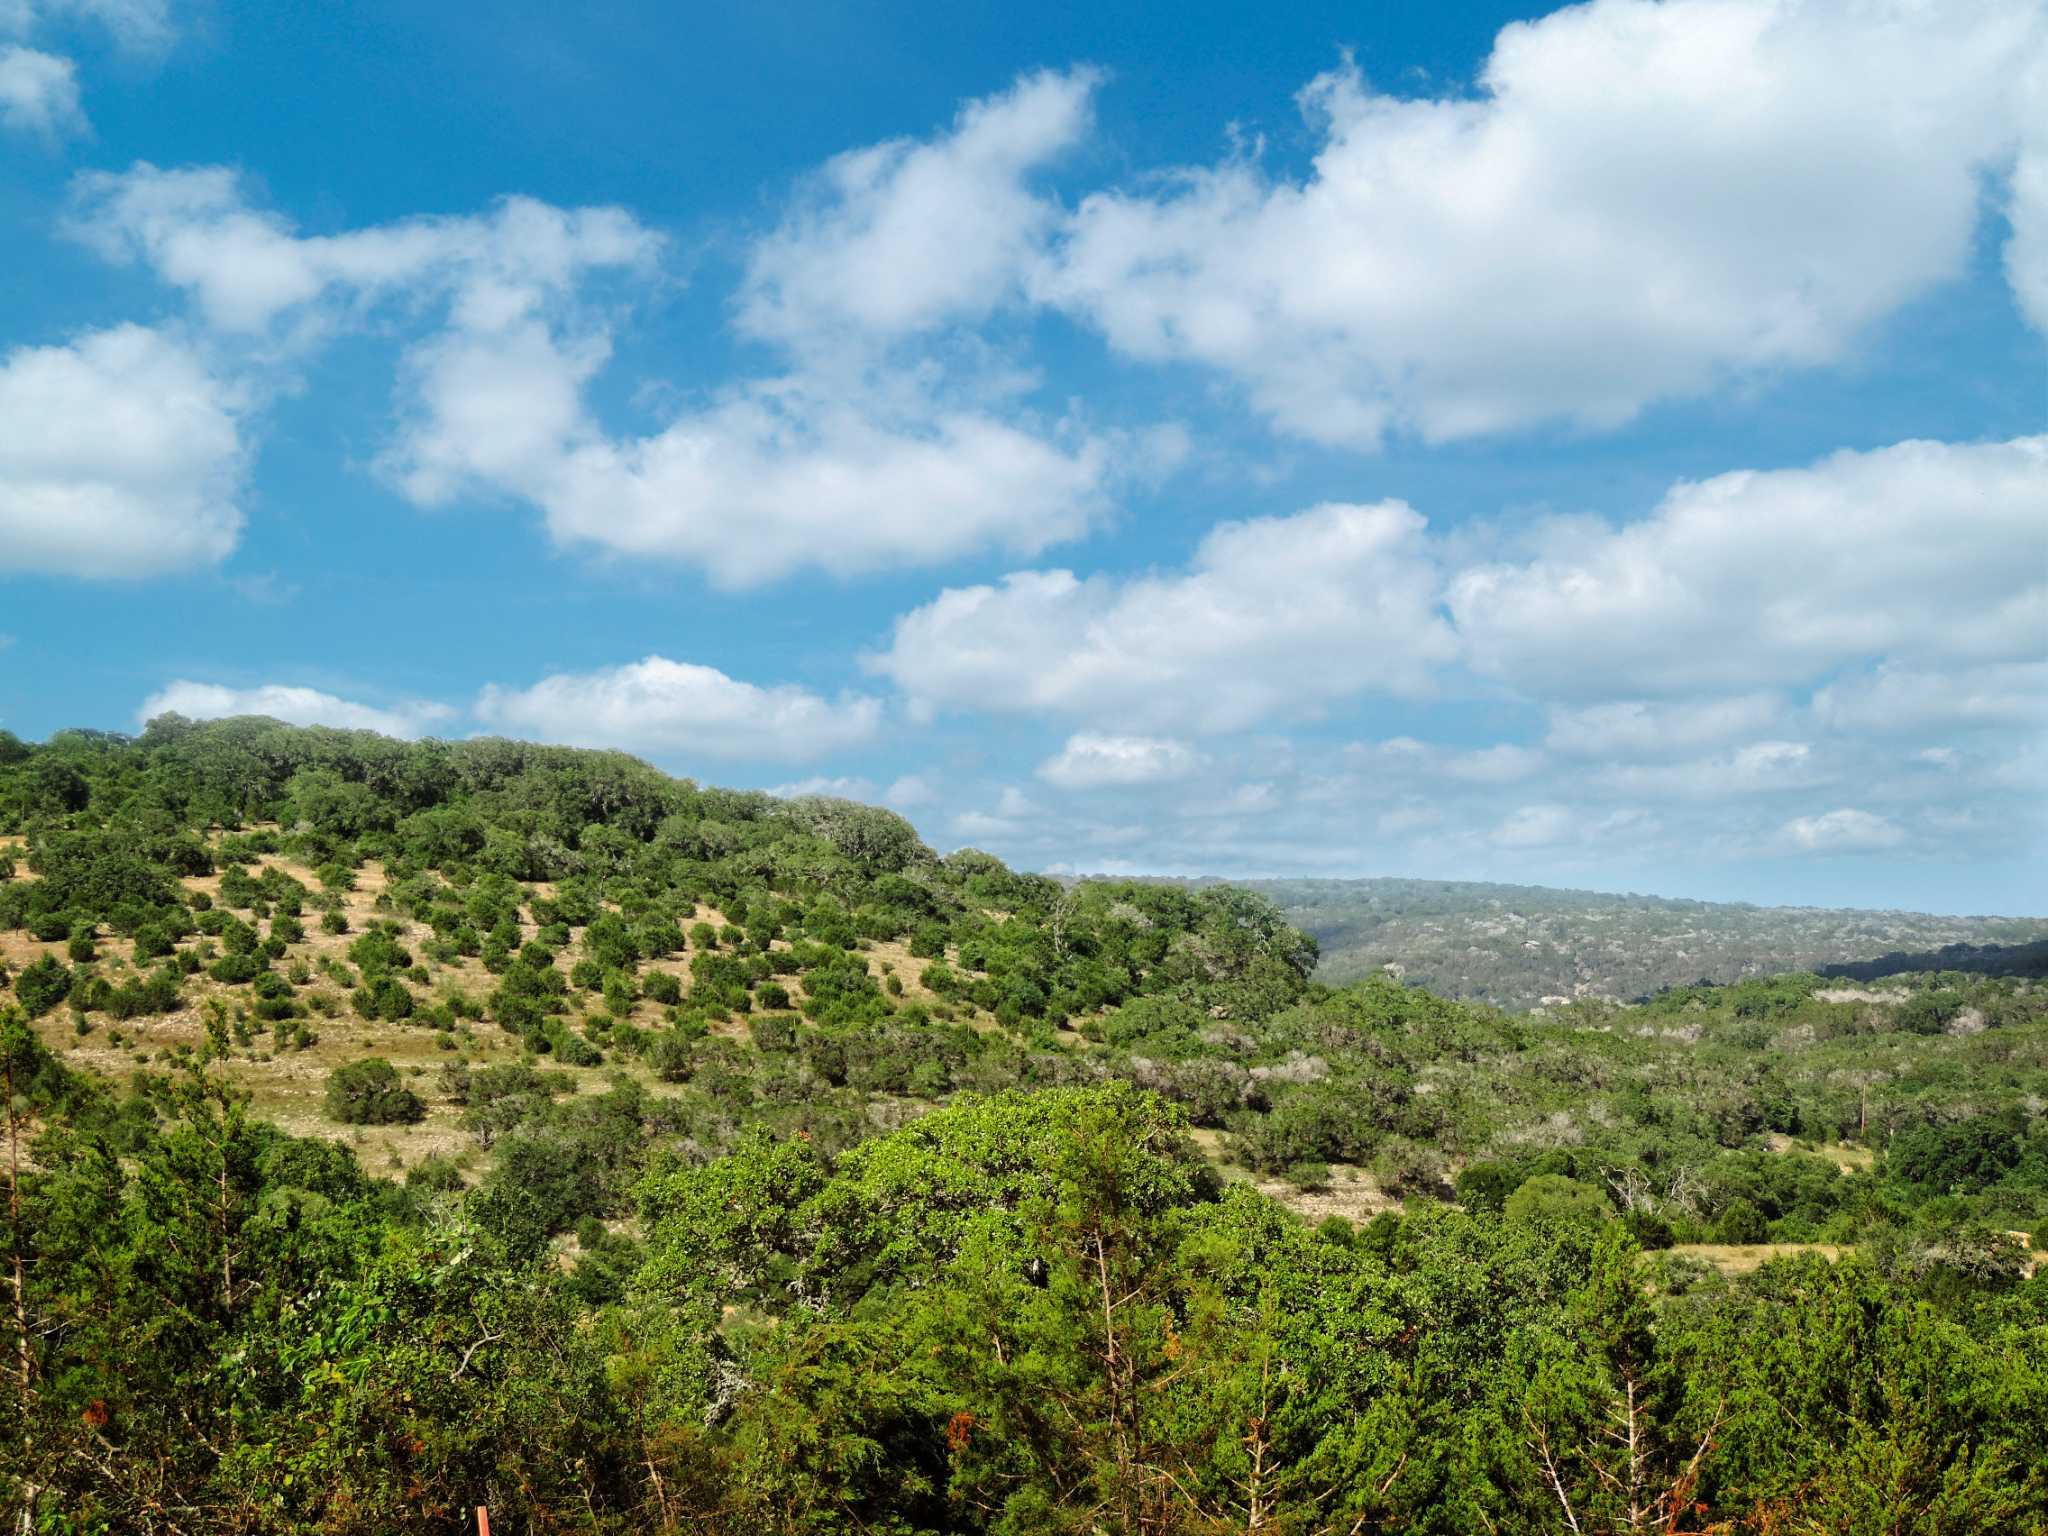 Texas Hill Country homes, acreage properties available at Vintage Oaks - Houston Chronicle